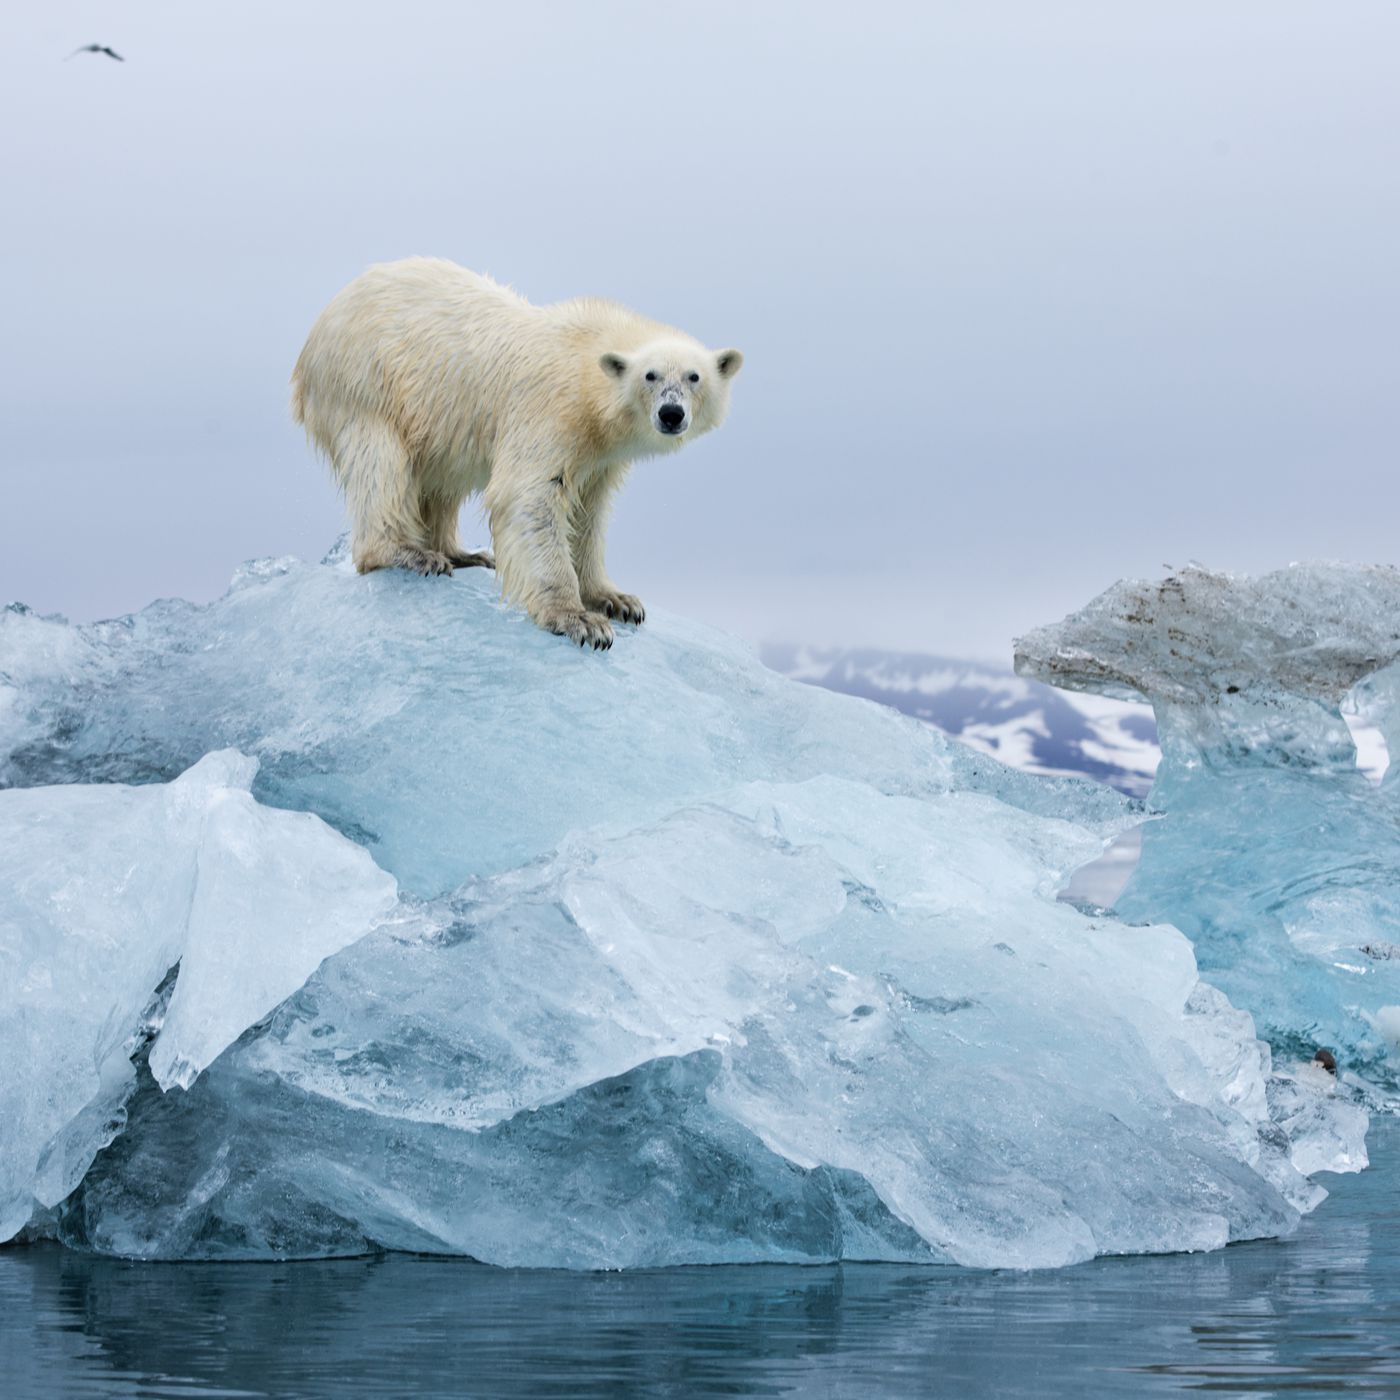 plakat fusion Vend tilbage Study finds some hope for polar bears in an Arctic with less sea ice - Vox